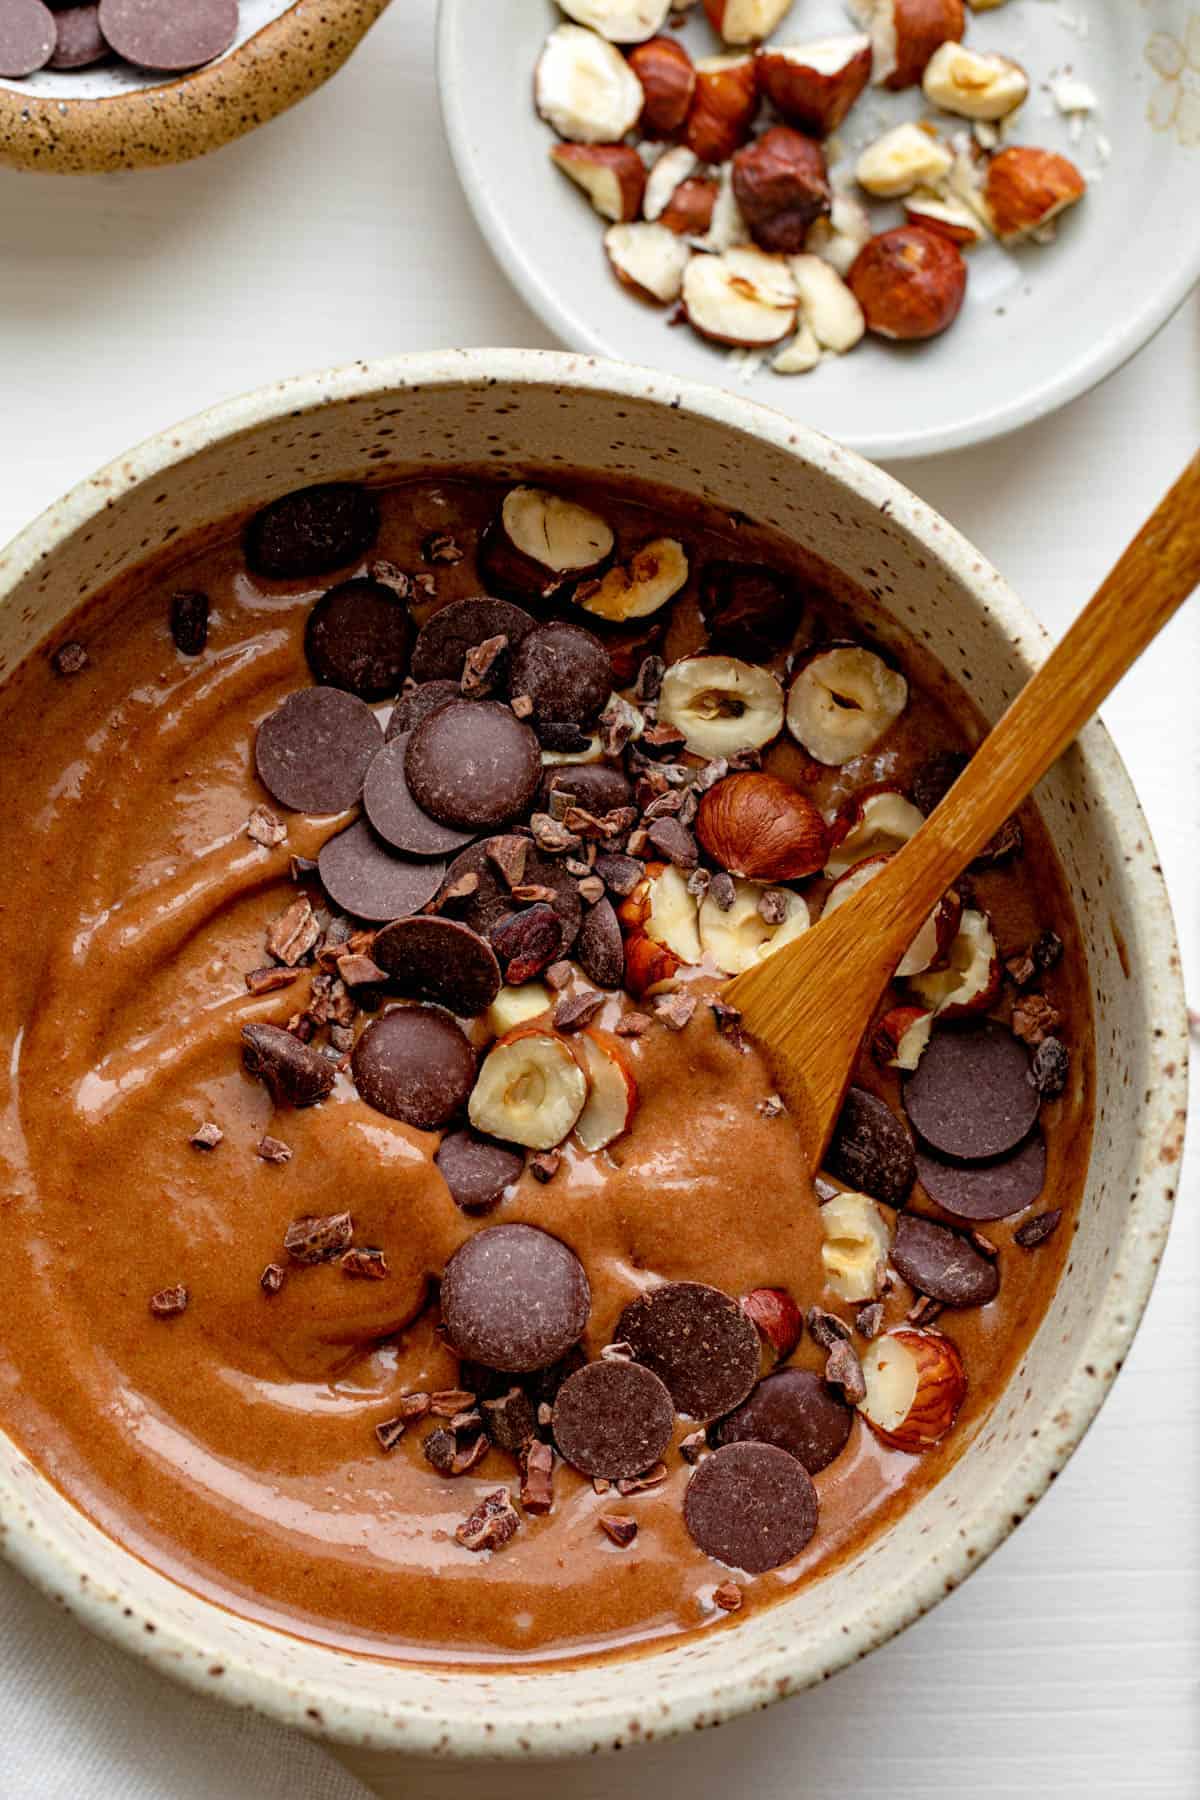 Close up of chocolate hazelnut smoothie bowl with wooden spoon inside